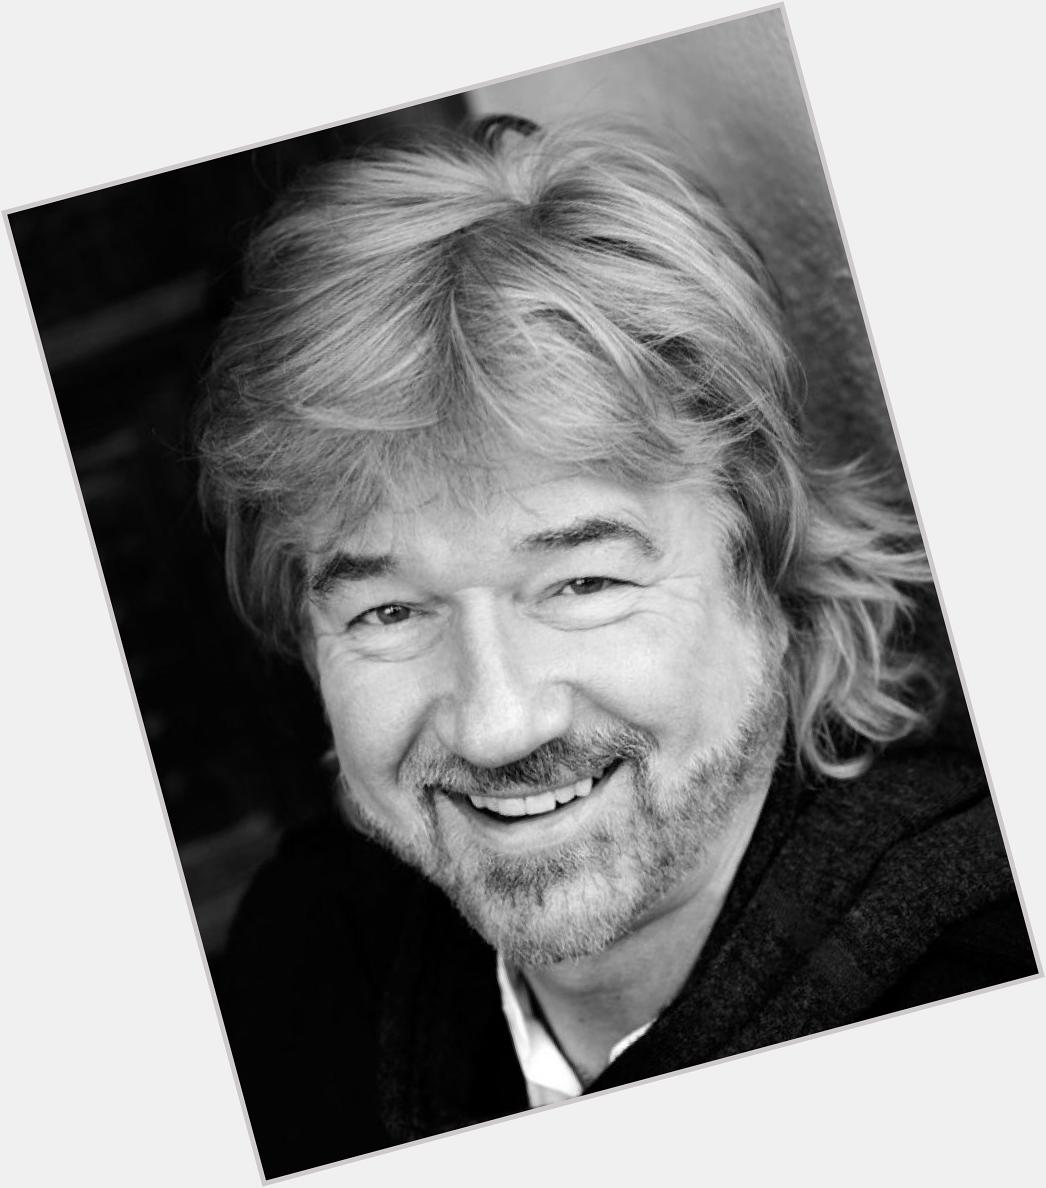 Https://fanpagepress.net/m/W/Willy Russell Sexy 0